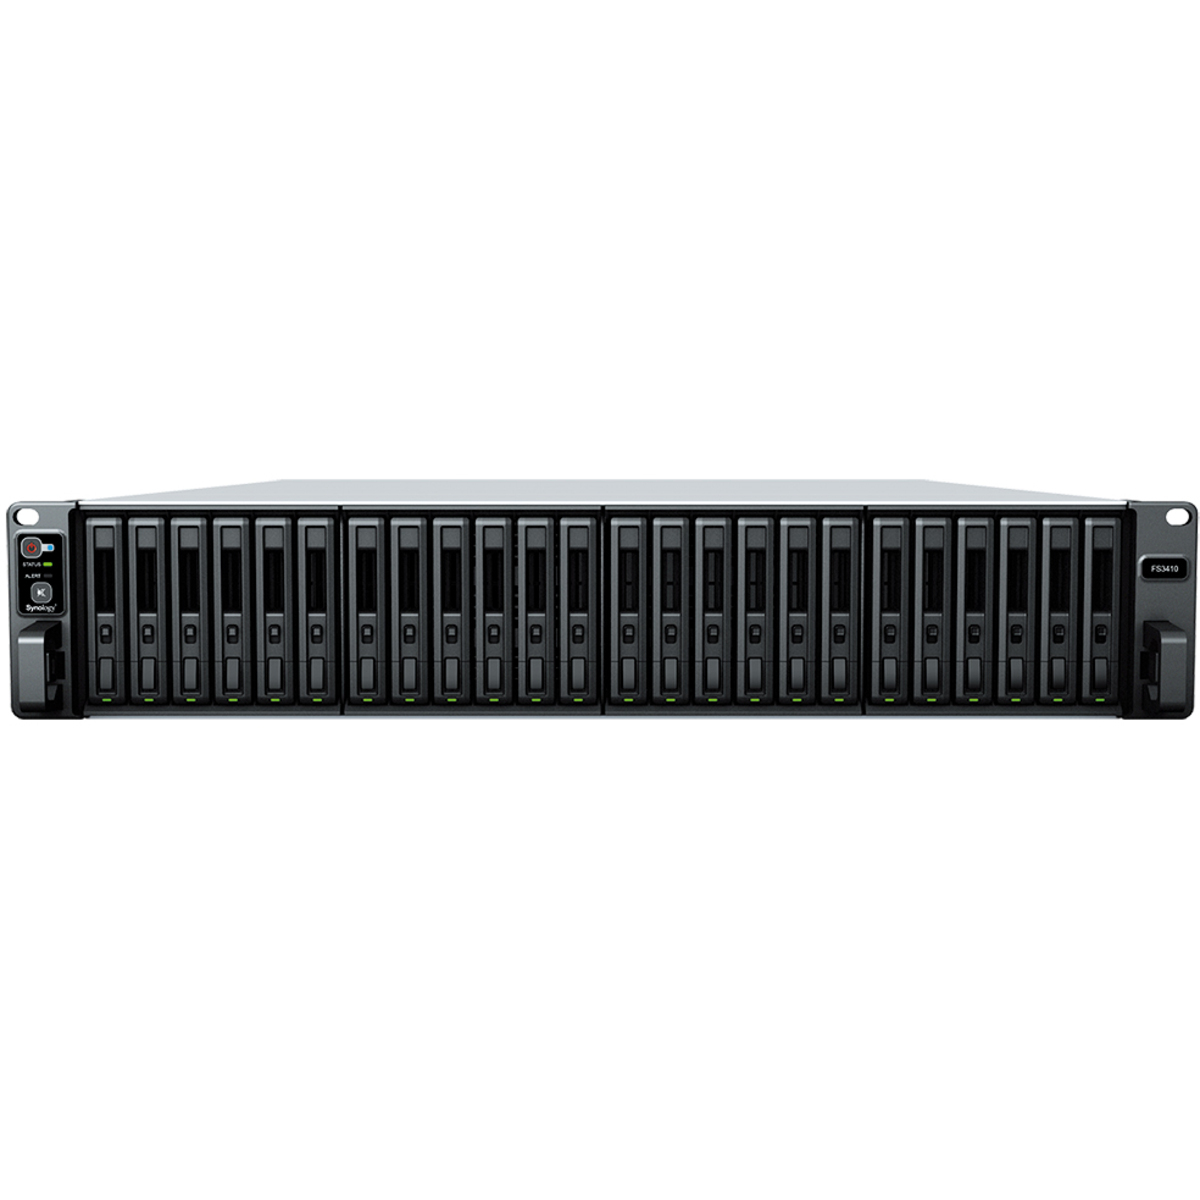 Synology FlashStation FS3410 18tb 24-Bay RackMount Large Business / Enterprise NAS - Network Attached Storage Device 18x1tb Crucial MX500 CT1000MX500SSD1 2.5 560/510MB/s SATA 6Gb/s SSD CONSUMER Class Drives Installed - Burn-In Tested FlashStation FS3410